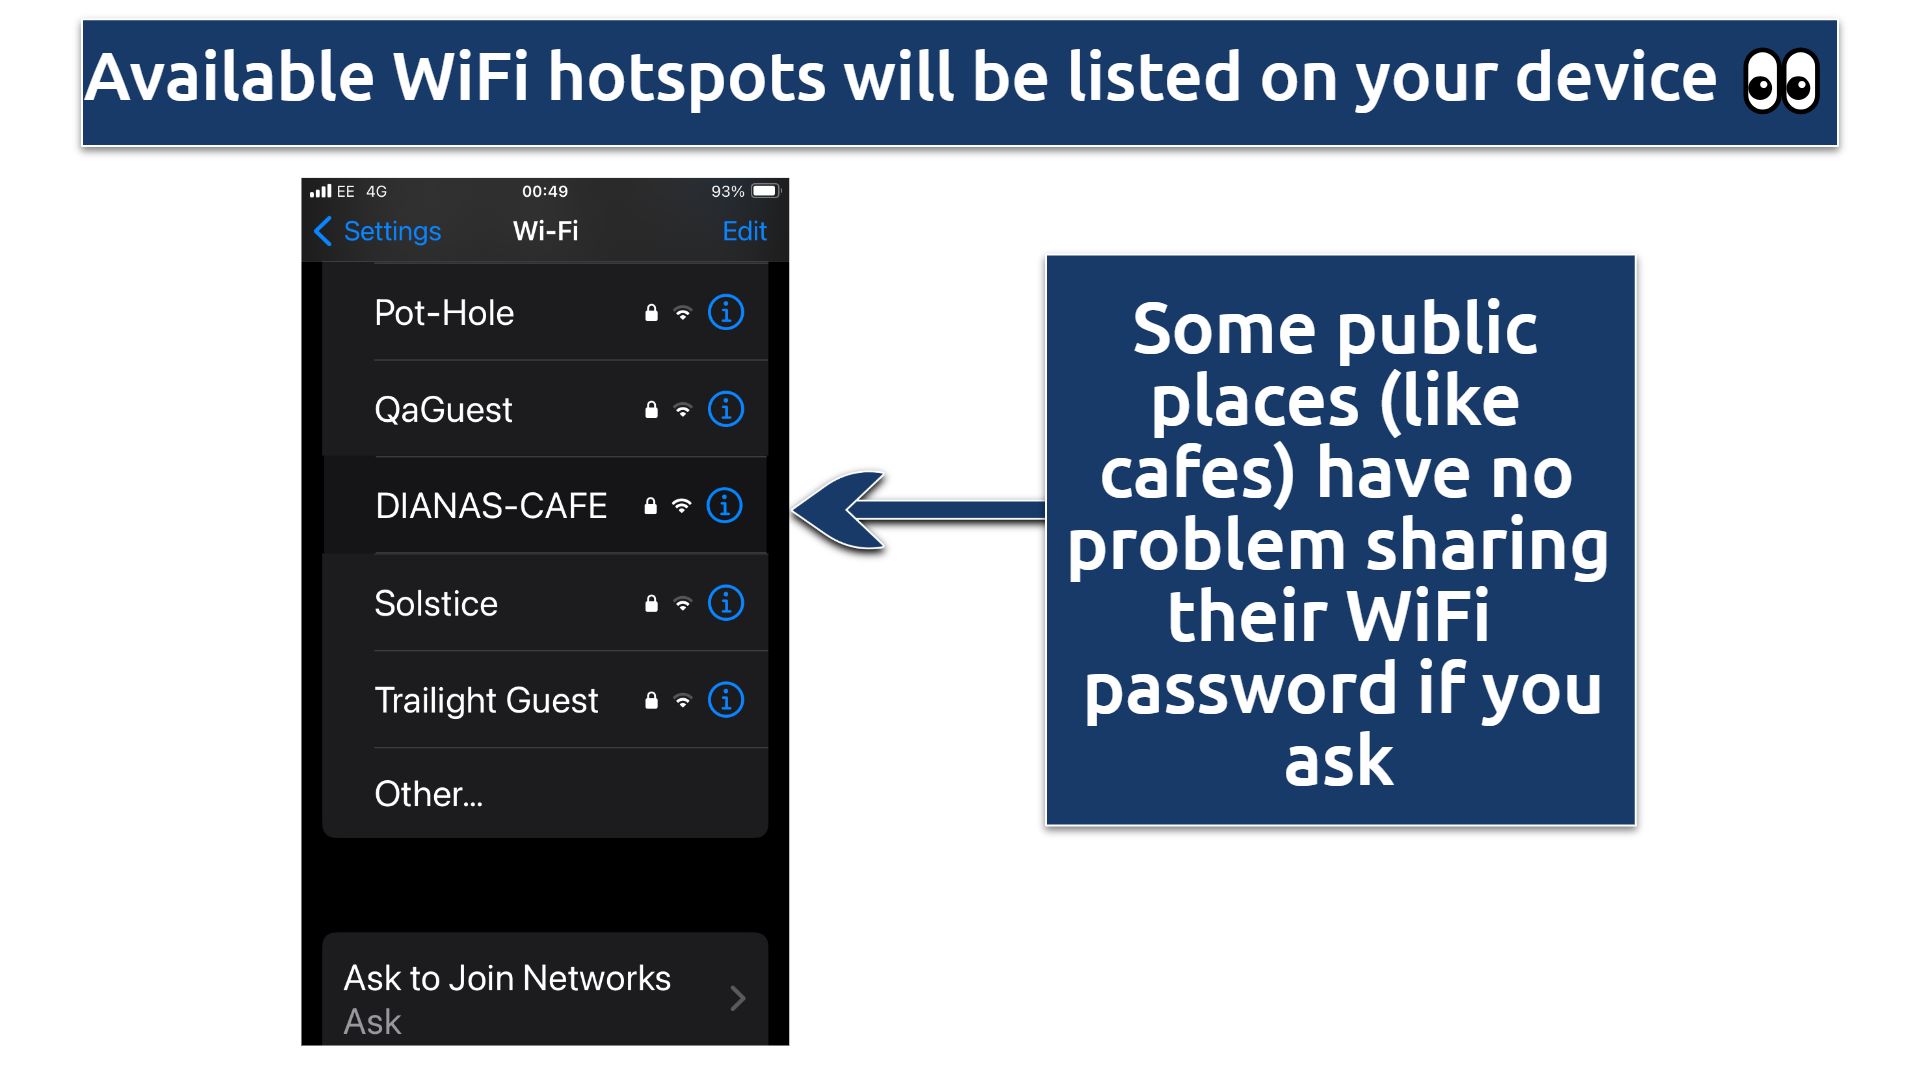 Screenshot showing the available WiFi hotspots on an iPhone